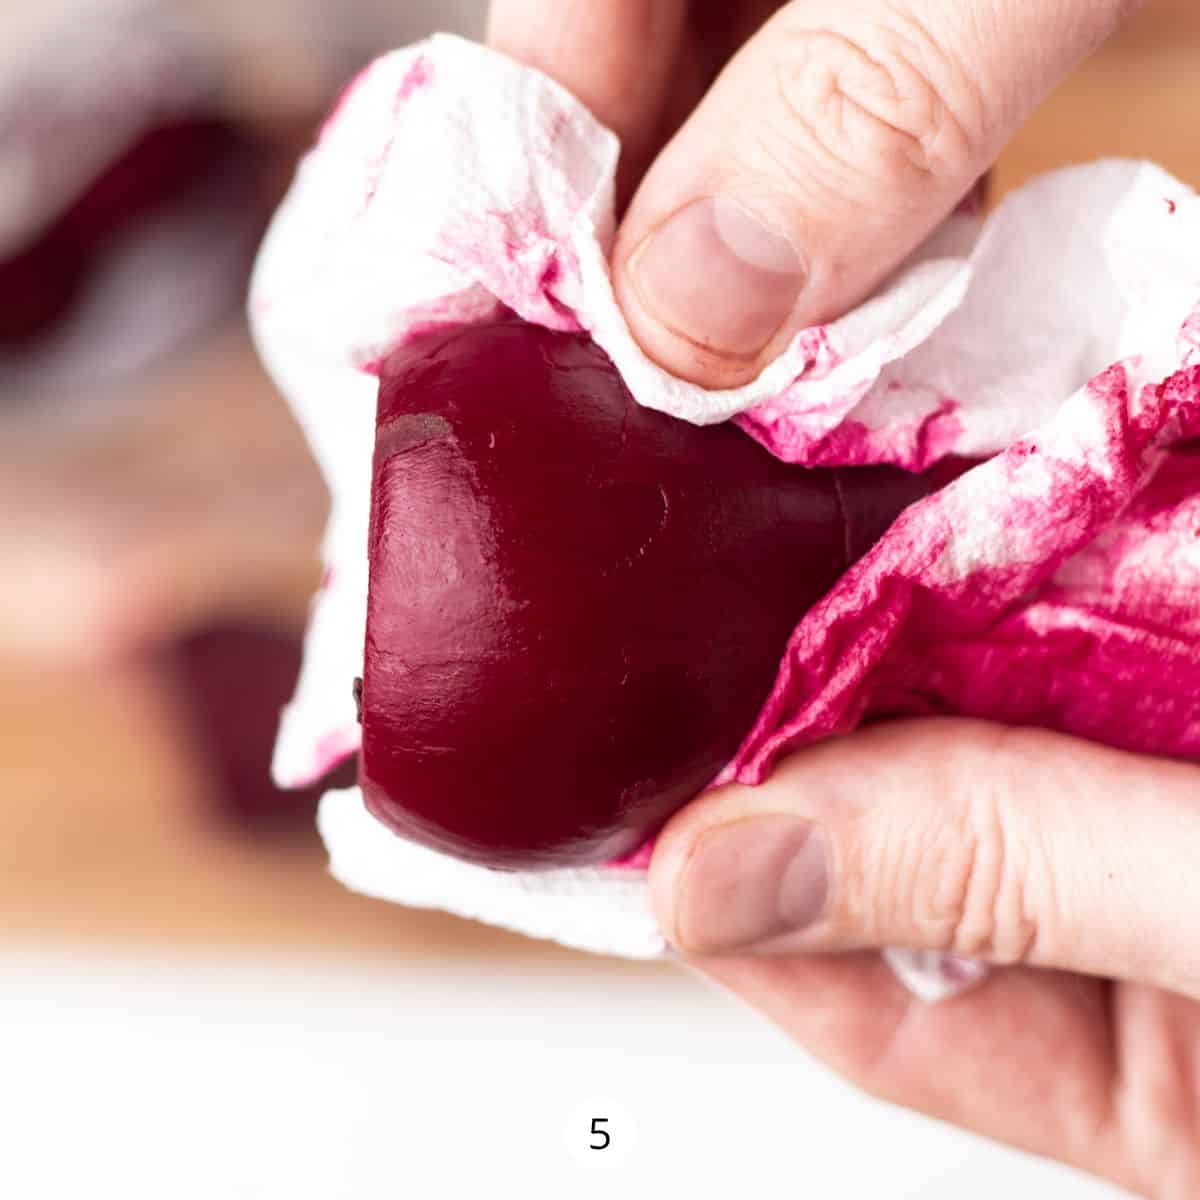 Peeling a red beet with a paper towel.